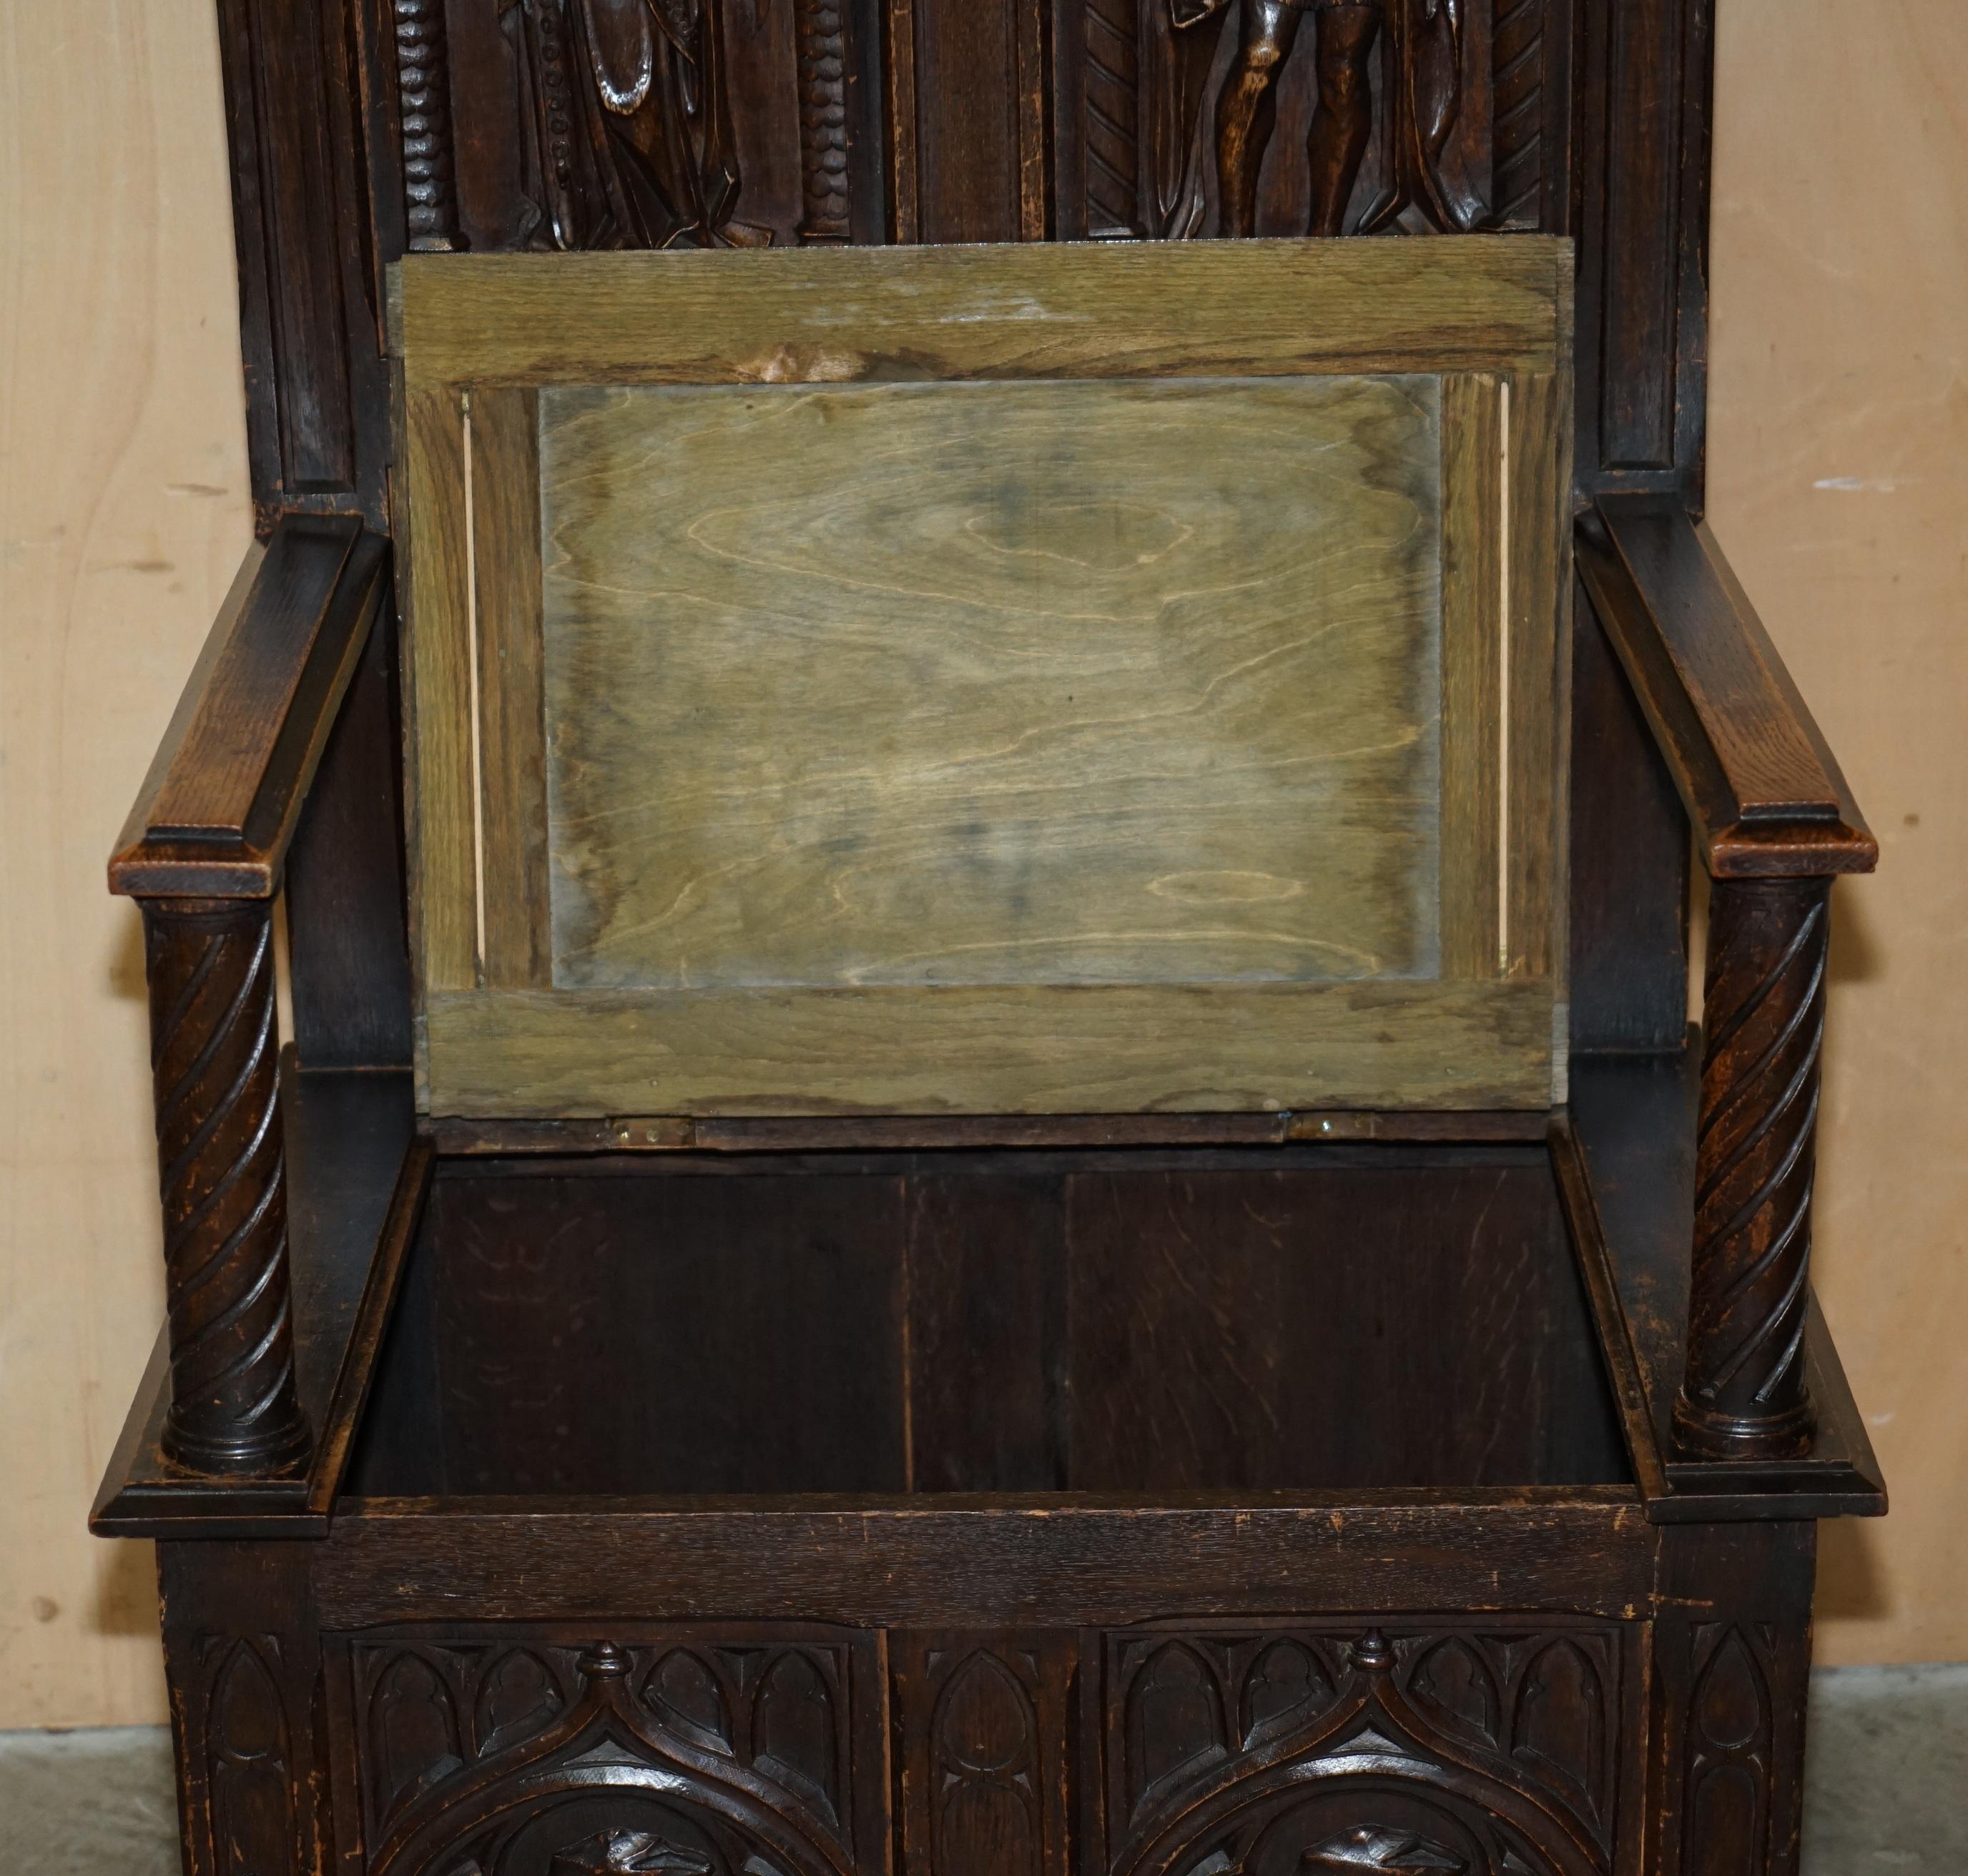 FINE ANTIQUE CiRCA 1860 JACOBEAN GOTHIC REVIVAL HAND CARVED PORTERS HALL CHAIR im Angebot 13